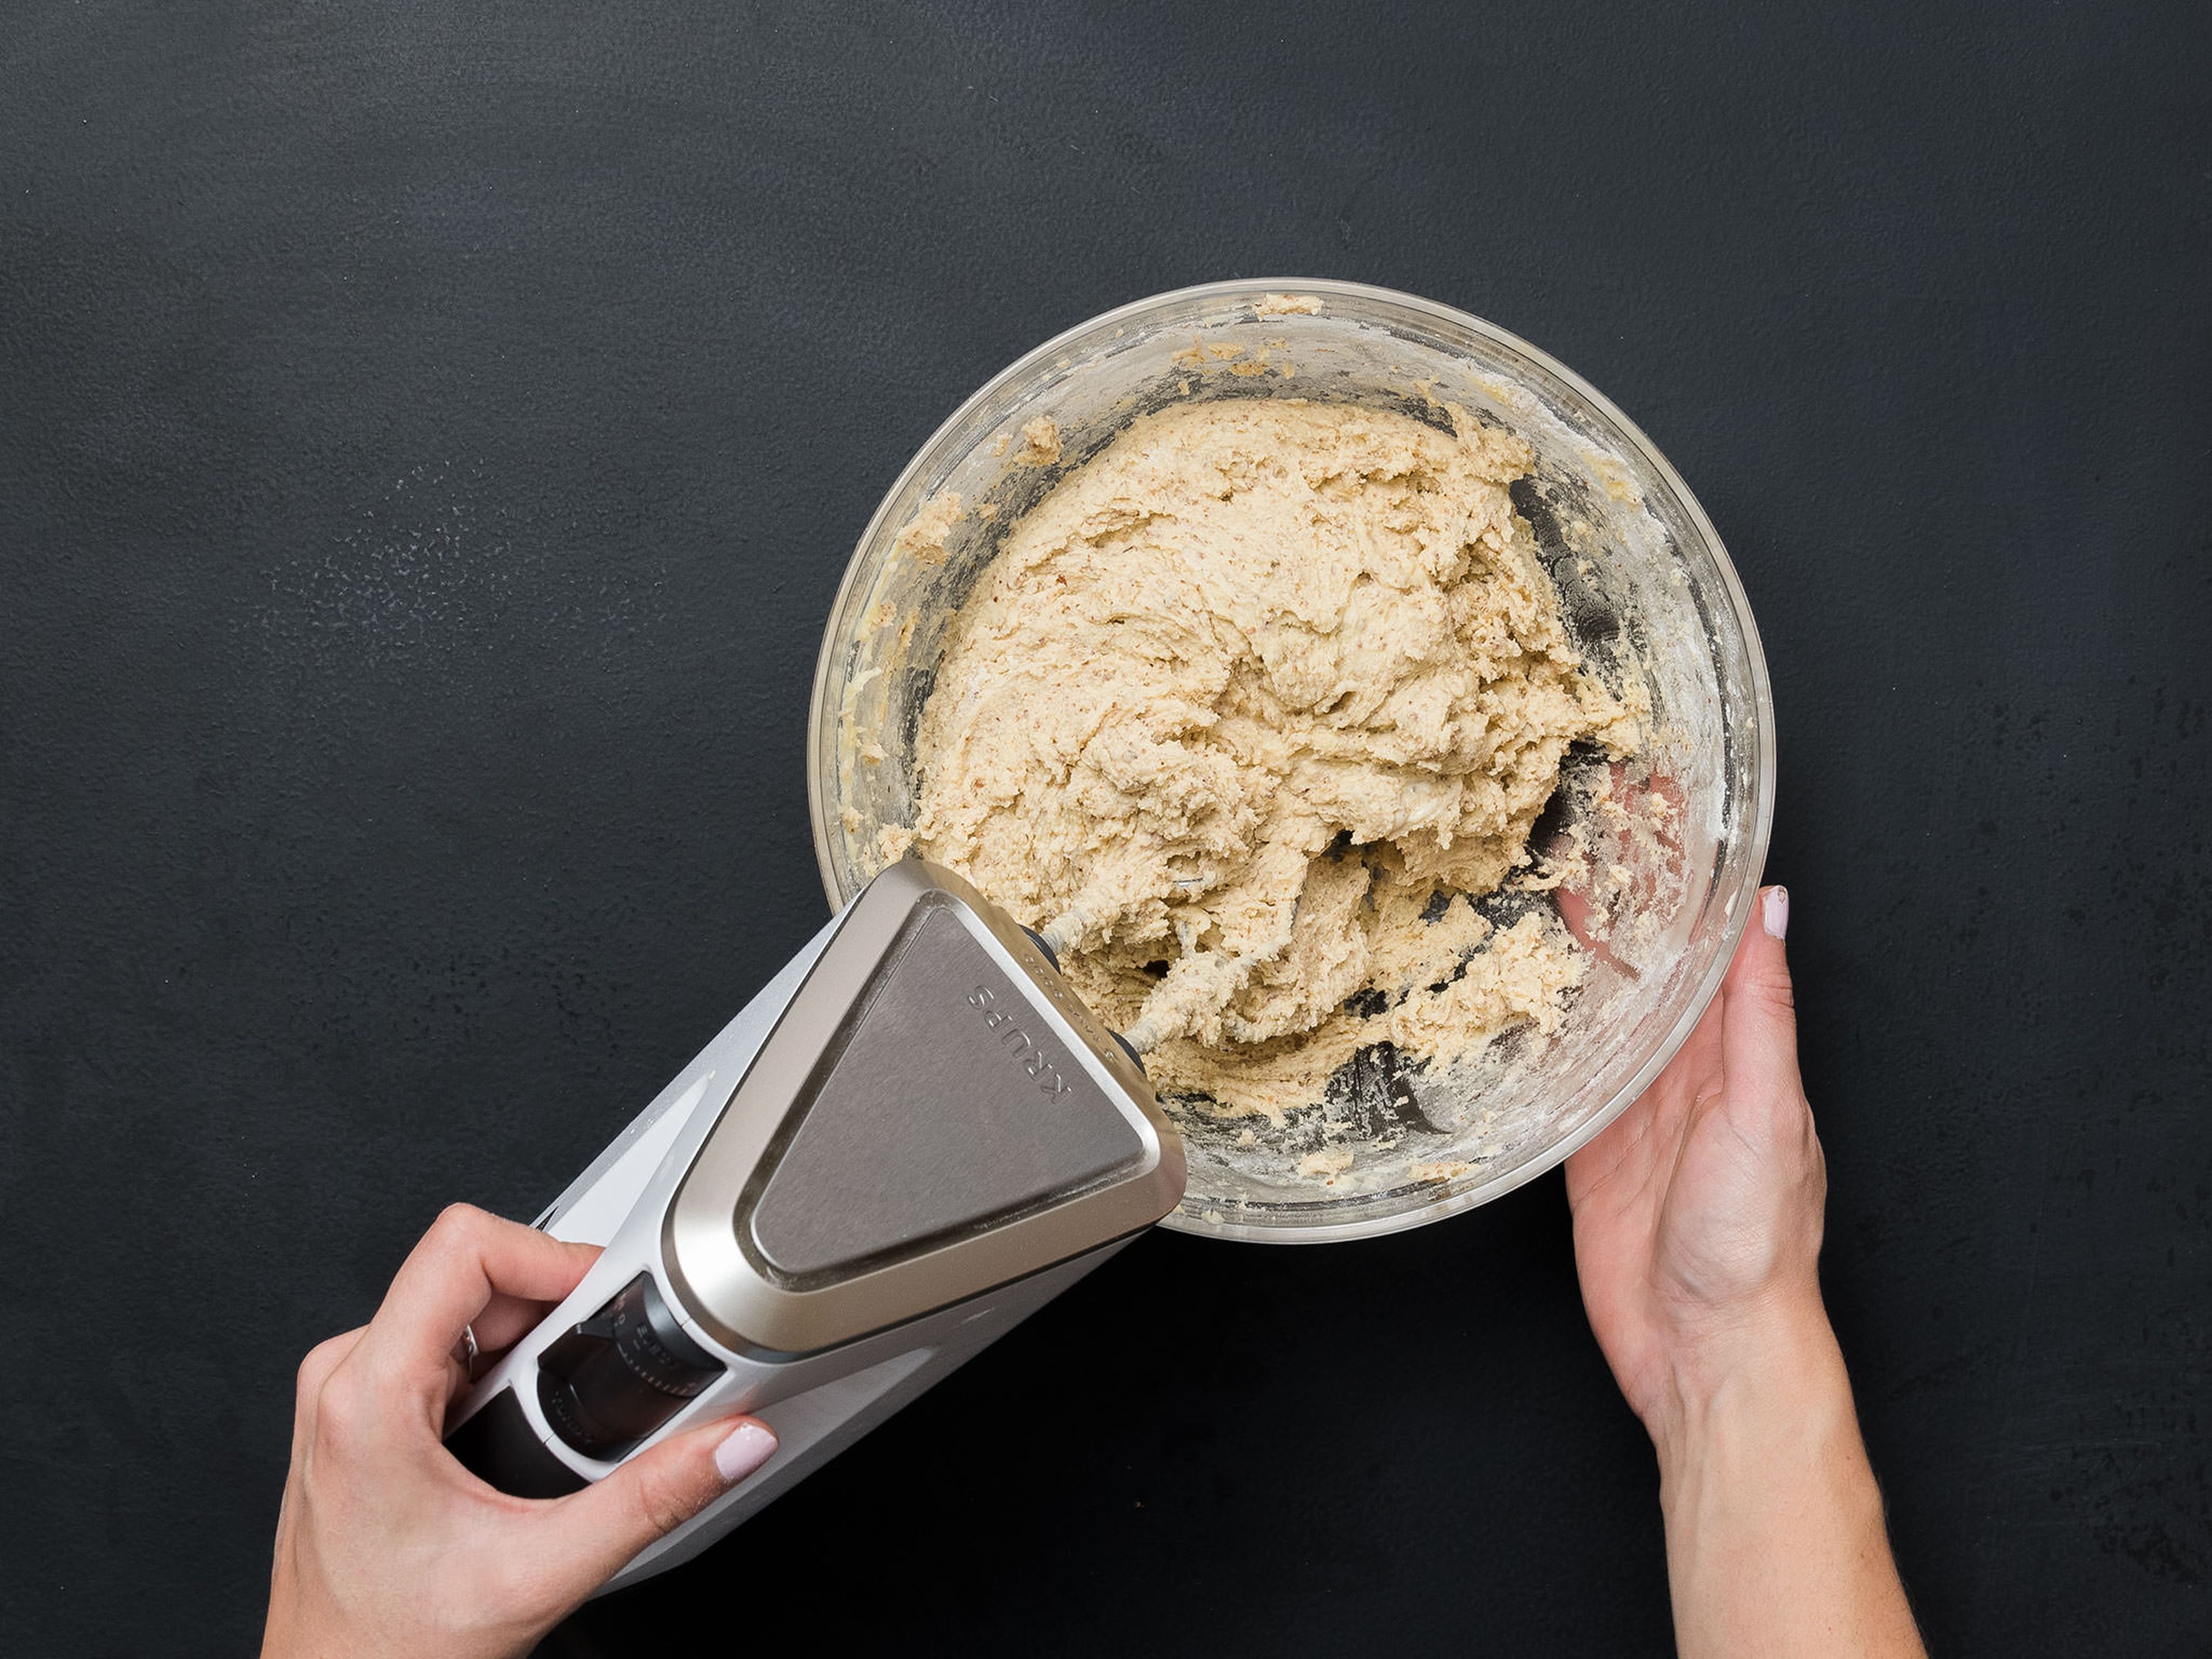 In a large bowl, mix flour and ground almonds and add to egg-butter mixture a little at a time, forming a fluffy dough. Add dough to a piping bag.